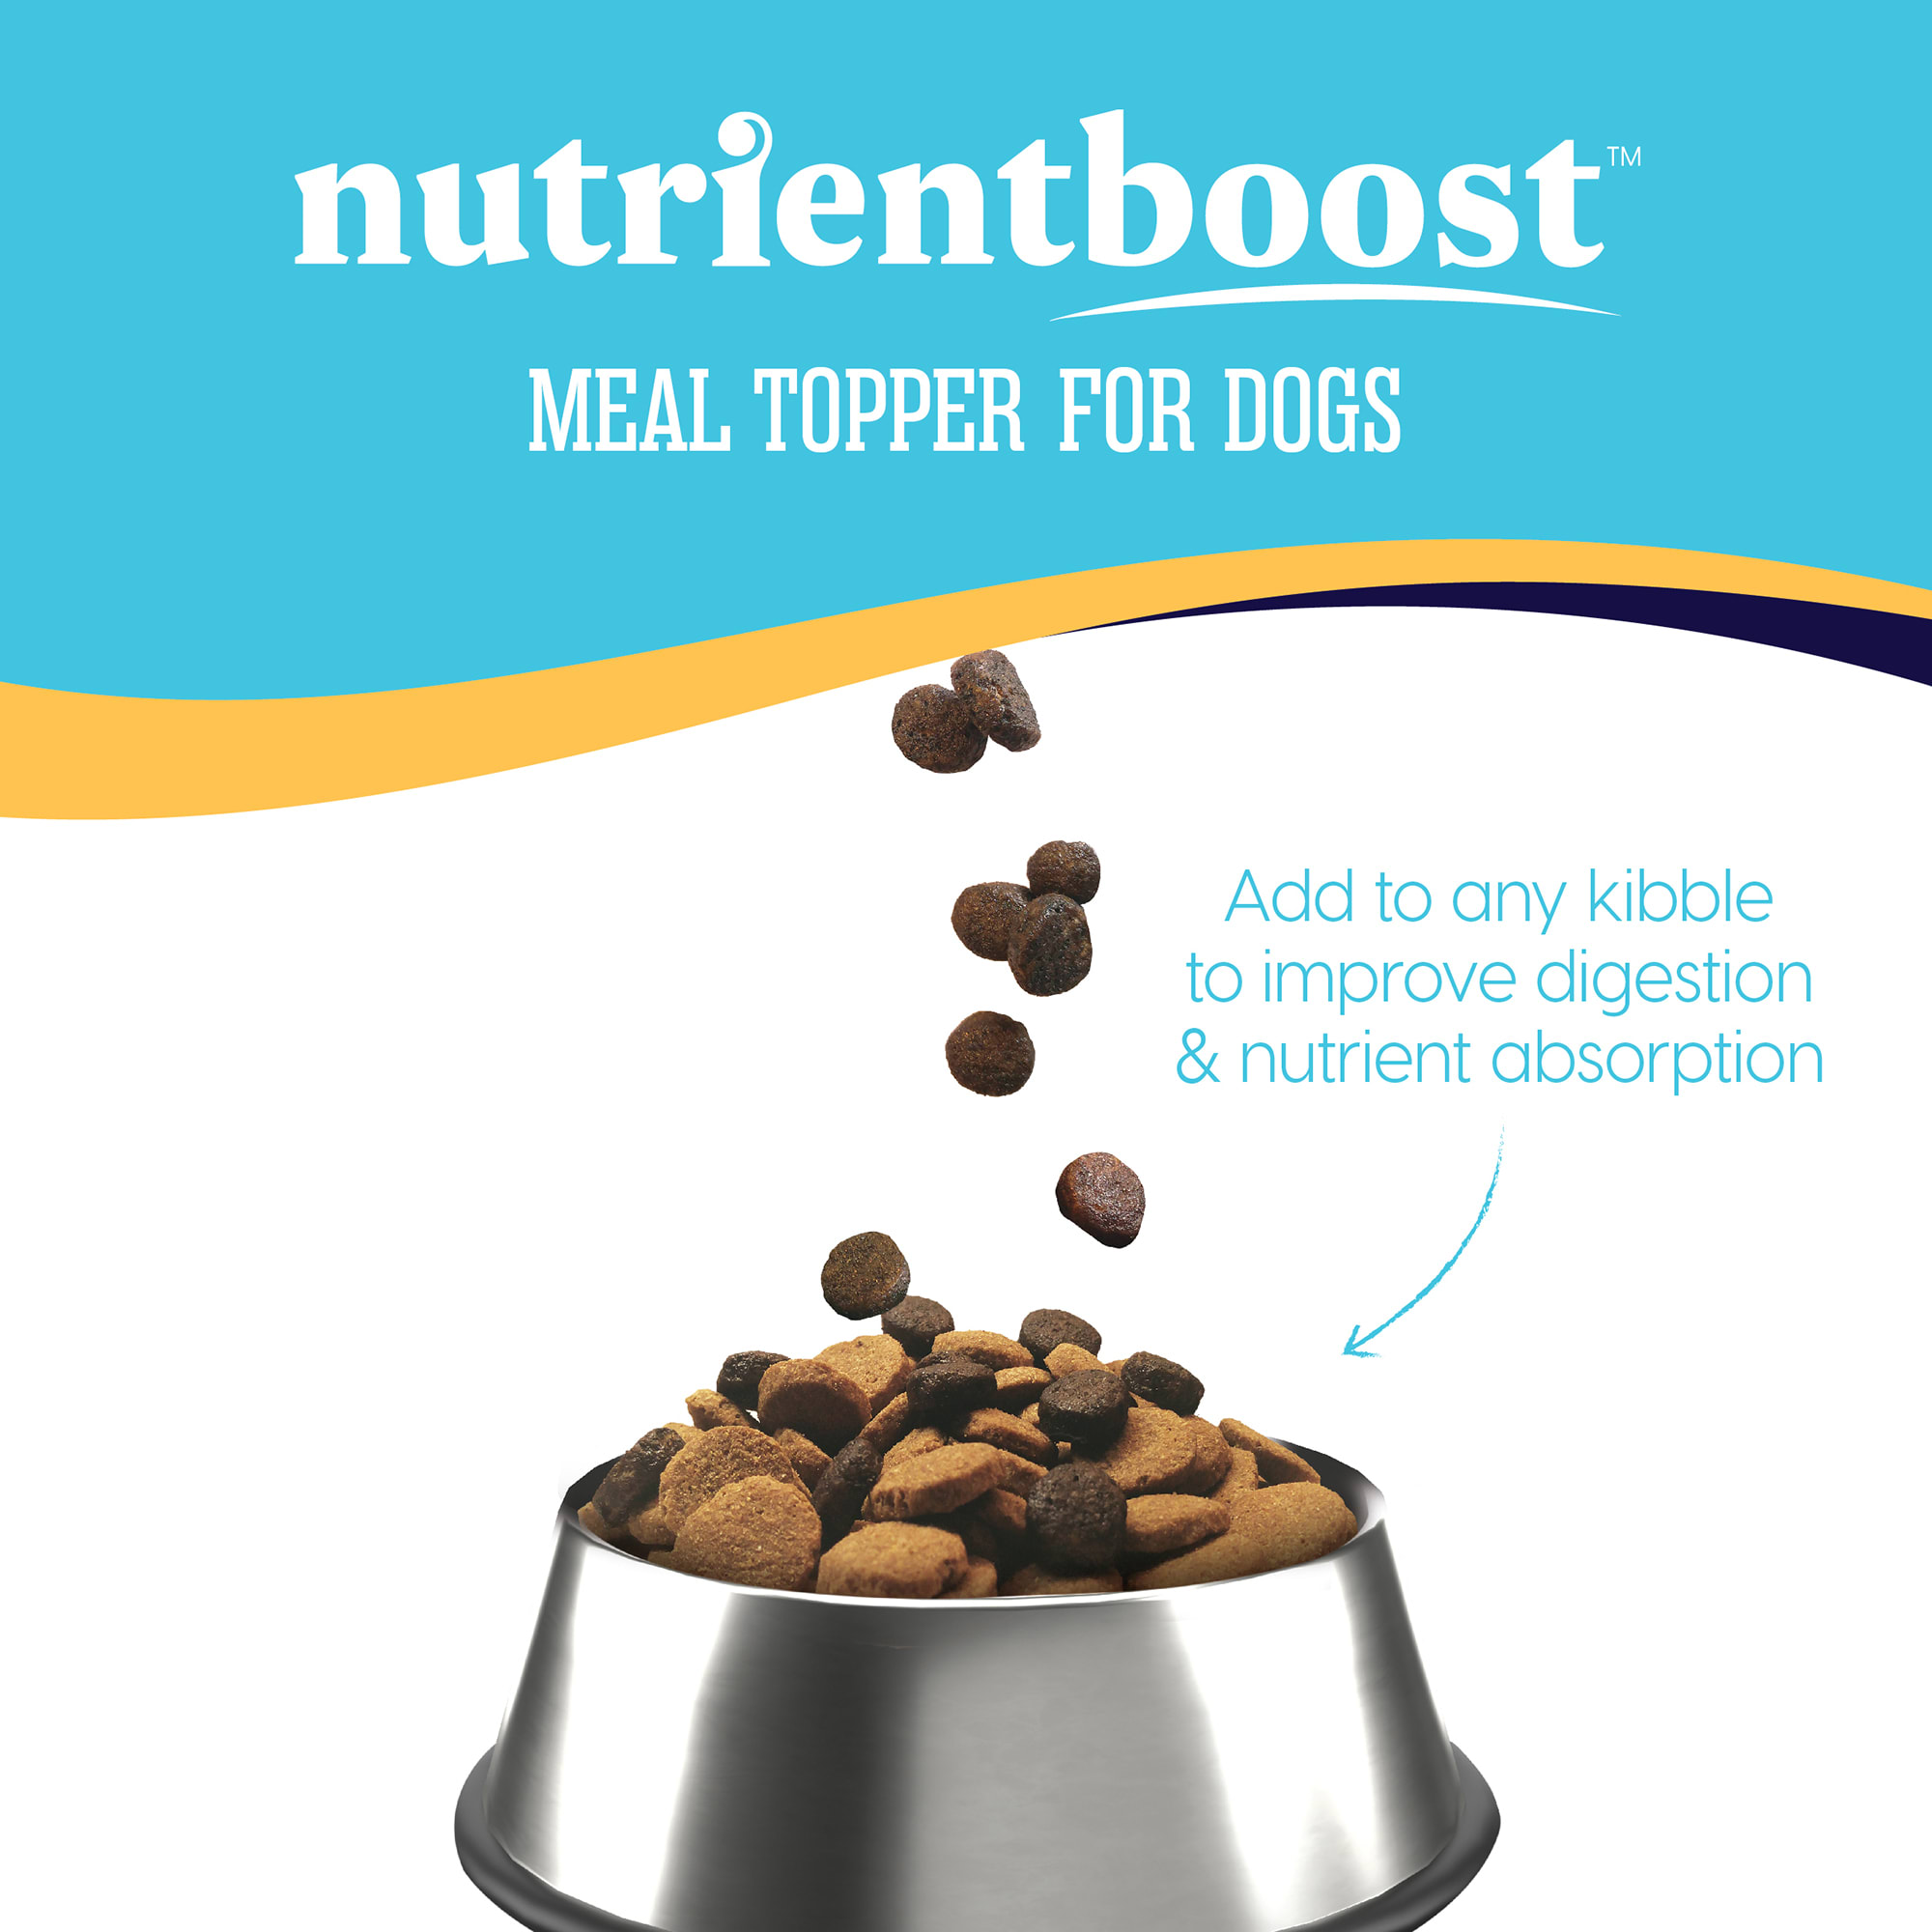 Solid Gold® Revolutionizes Pet Industry with Complete Line of nutrientboost™